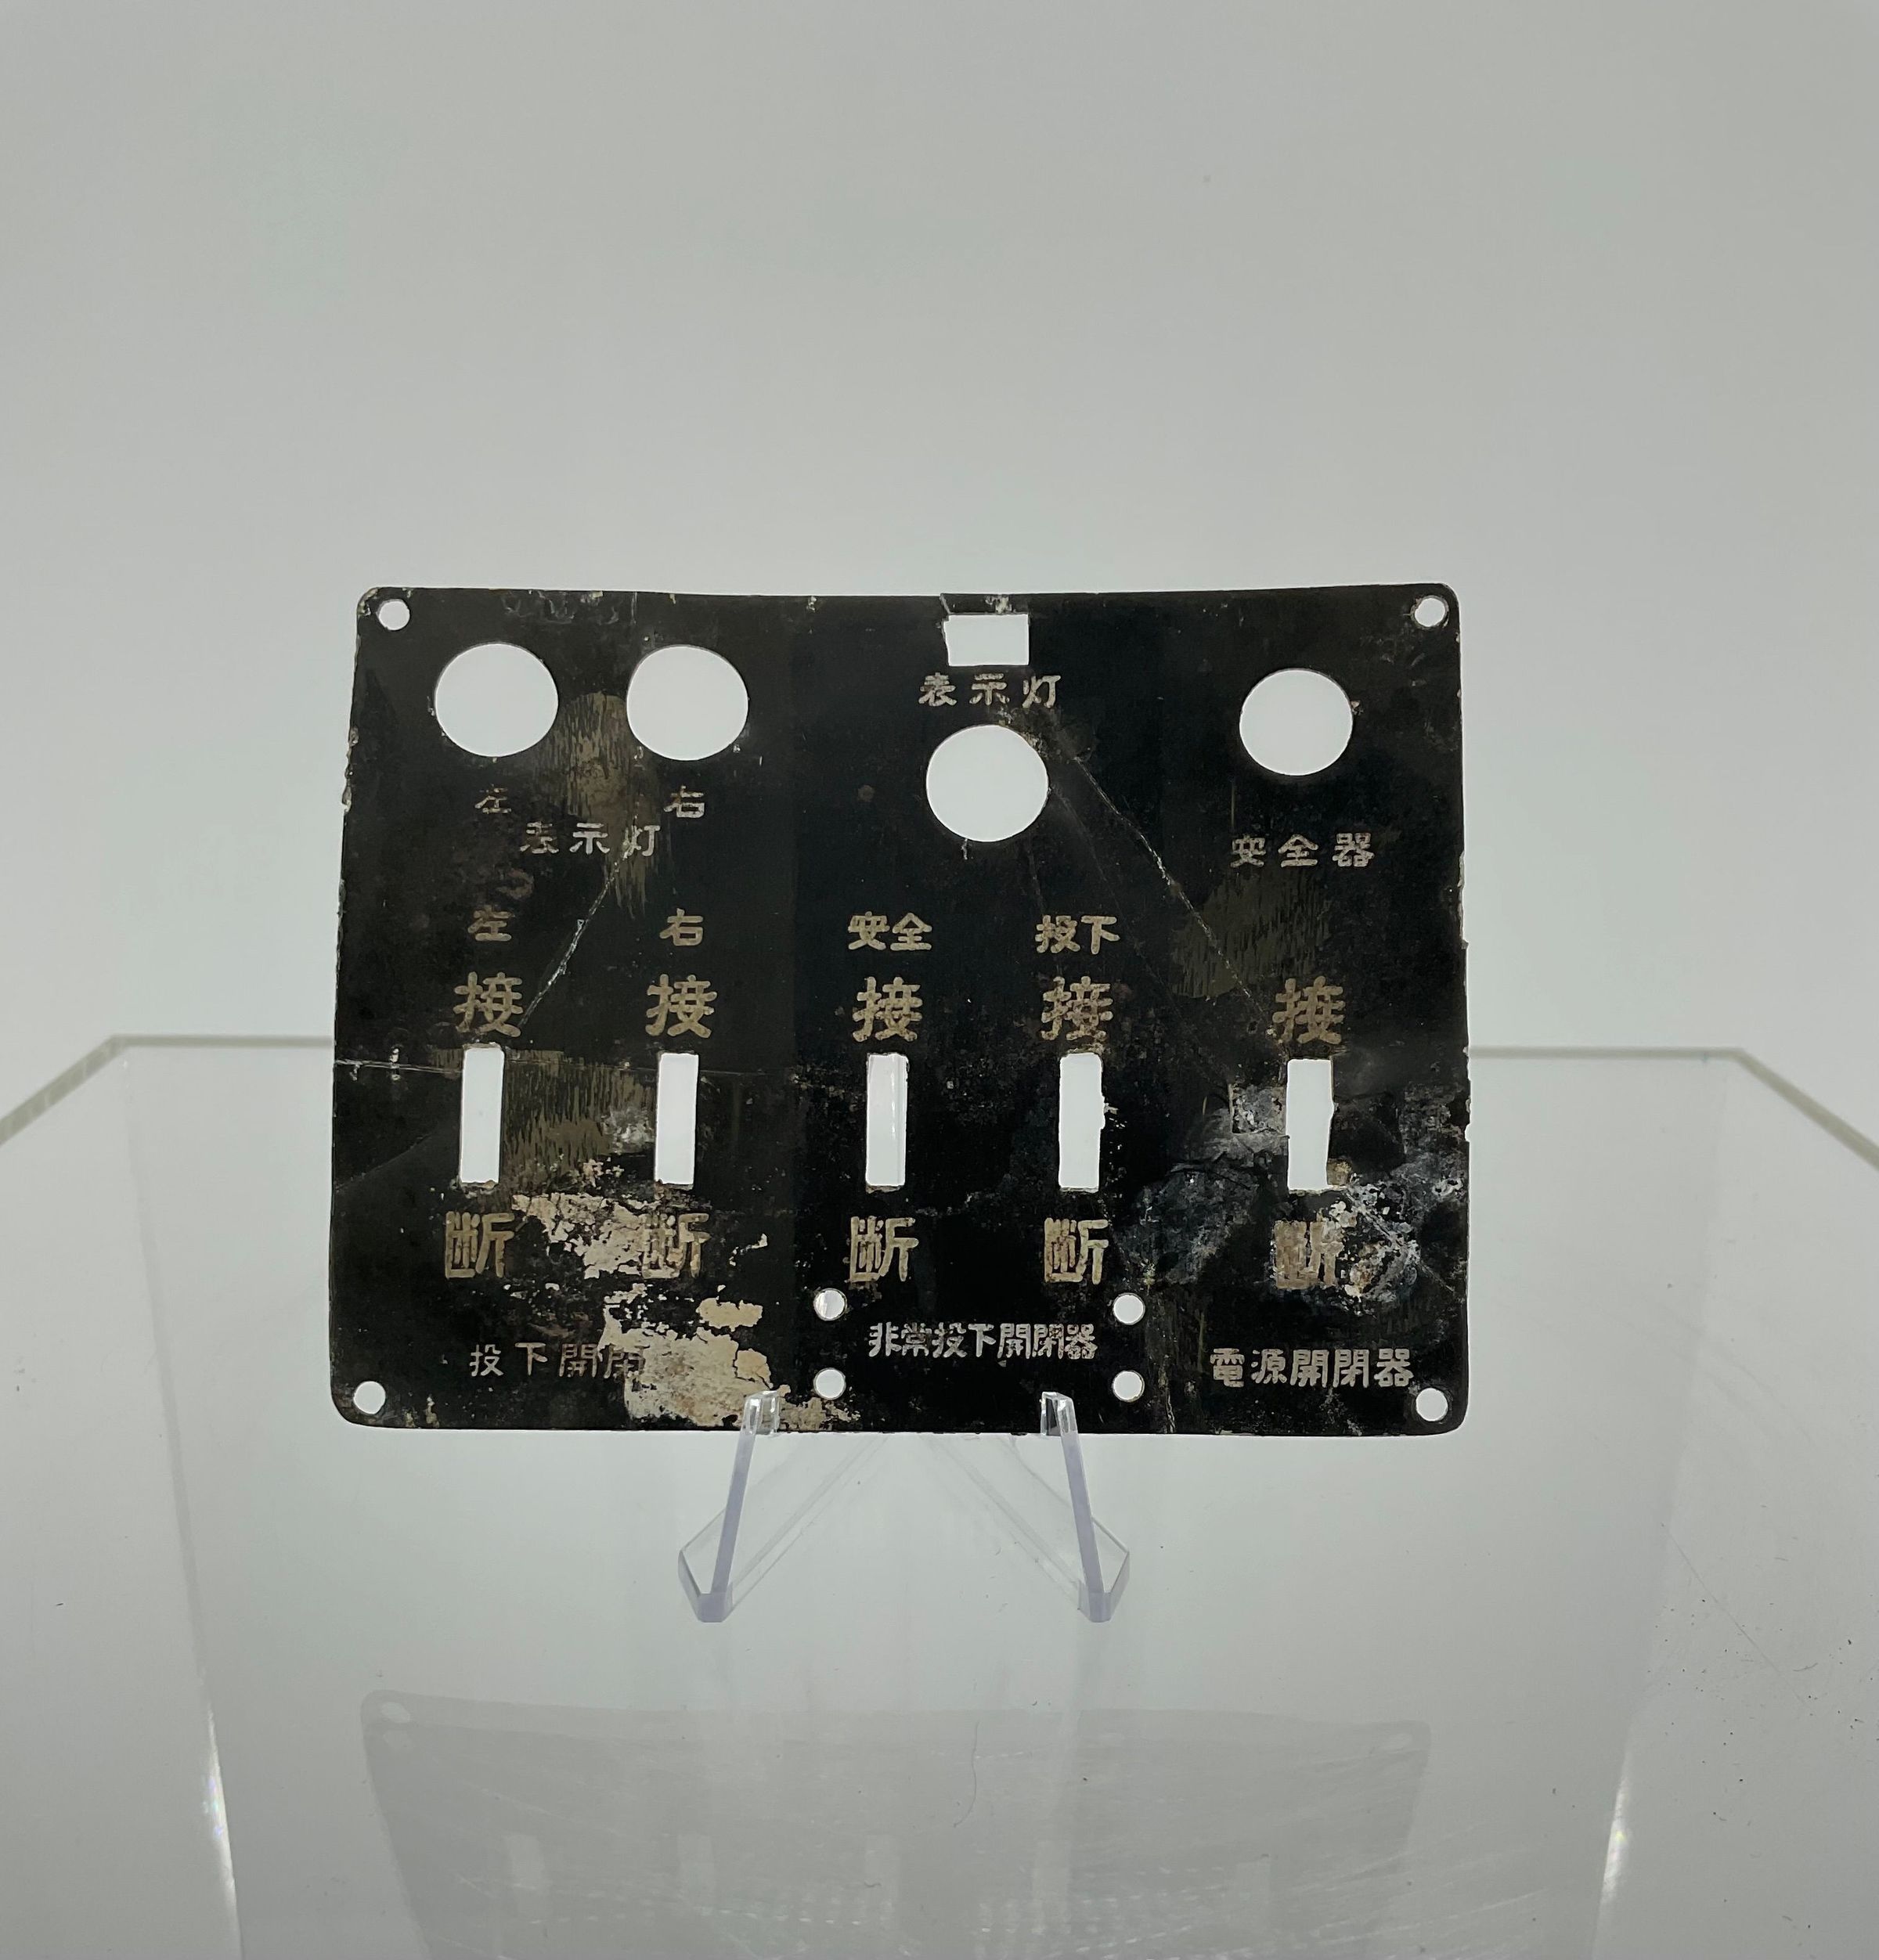 Primary Image of Japanese Control Panel Plate